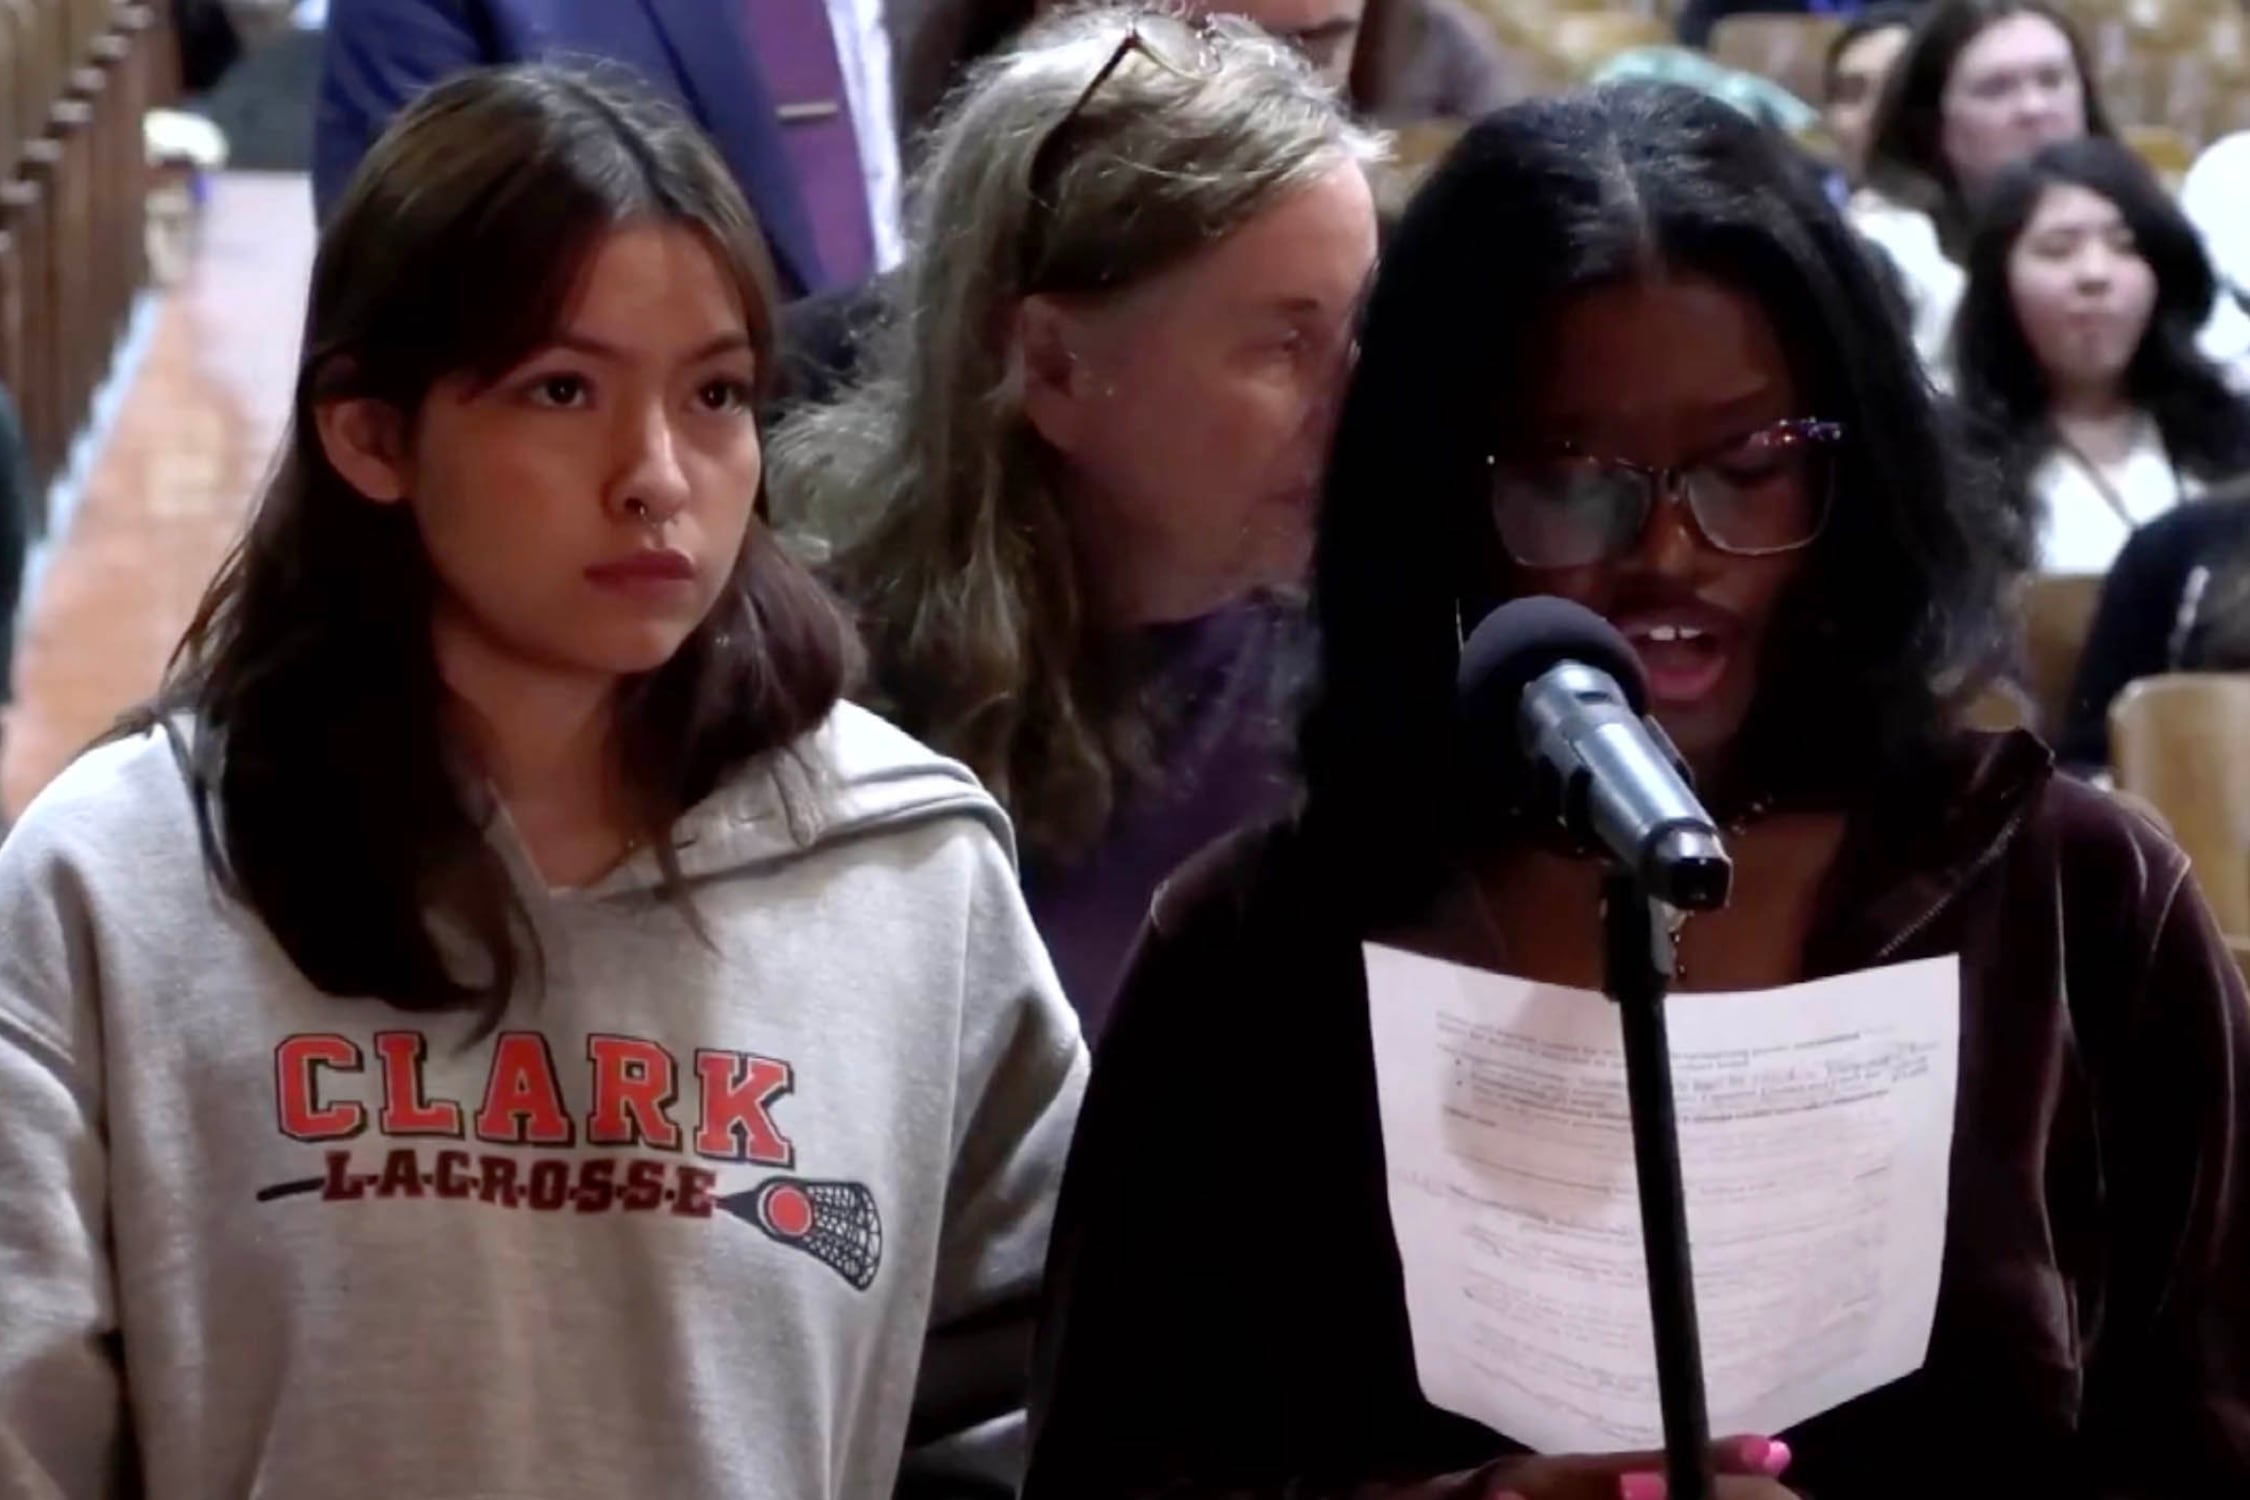 Two students with medium length hair stand next to each other while the student on the right reads from a piece of paper into a microphone with people sitting behind them.